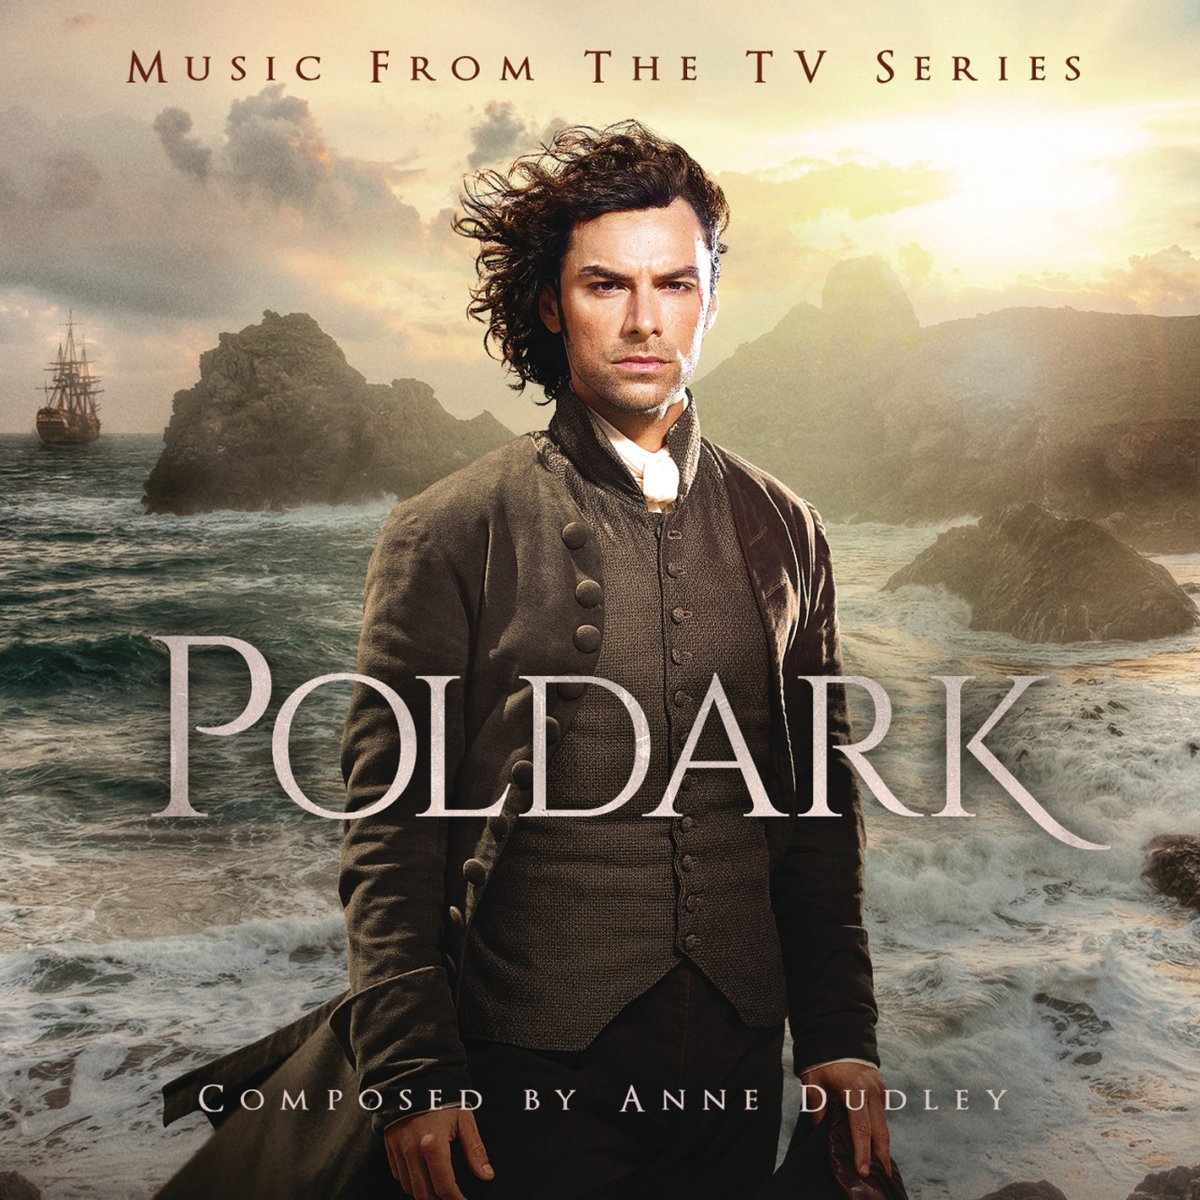 Missing Aidan Turner? Looking to get your #Poldark fix? Revisit @annedudleymusic's achingly beautiful Poldark soundtrack. Listen now: soundtracks.lnk.to/poldark